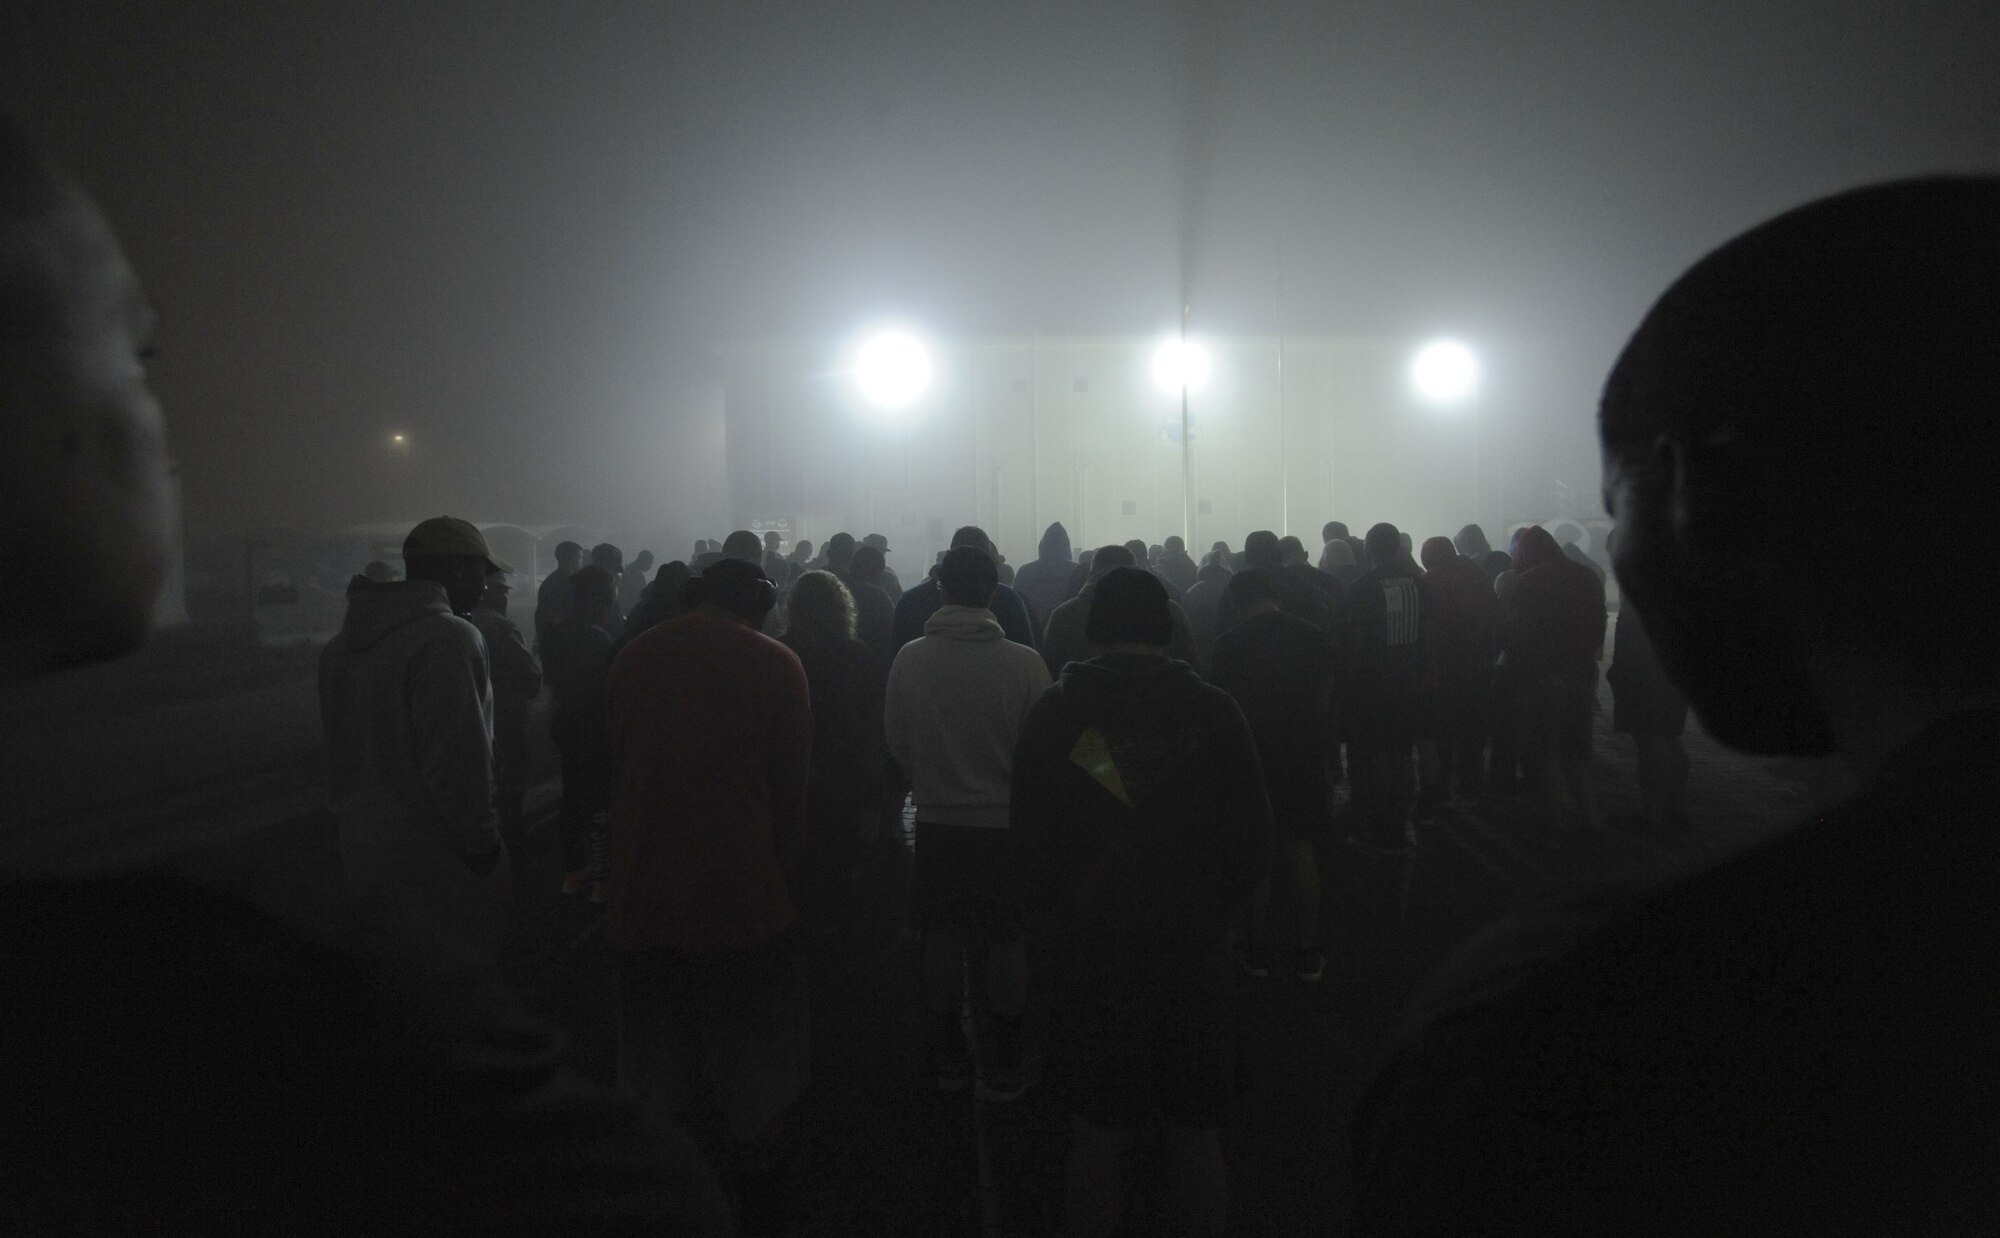 Service members deployed to the 380th Air Expeditionary Wing, Al Dhafra Air Base, United Arab Emirates, stand in silence during the invocation at the Dr. Martin Luther King Jr. observance day memorial walk Jan. 15, 2018. A dense fog prefaced the event and lingered as the many acts and accomplishments of Dr. King’s life were read. (U. S. Air Force photo by Airman 1st Class D. Blake Browning)